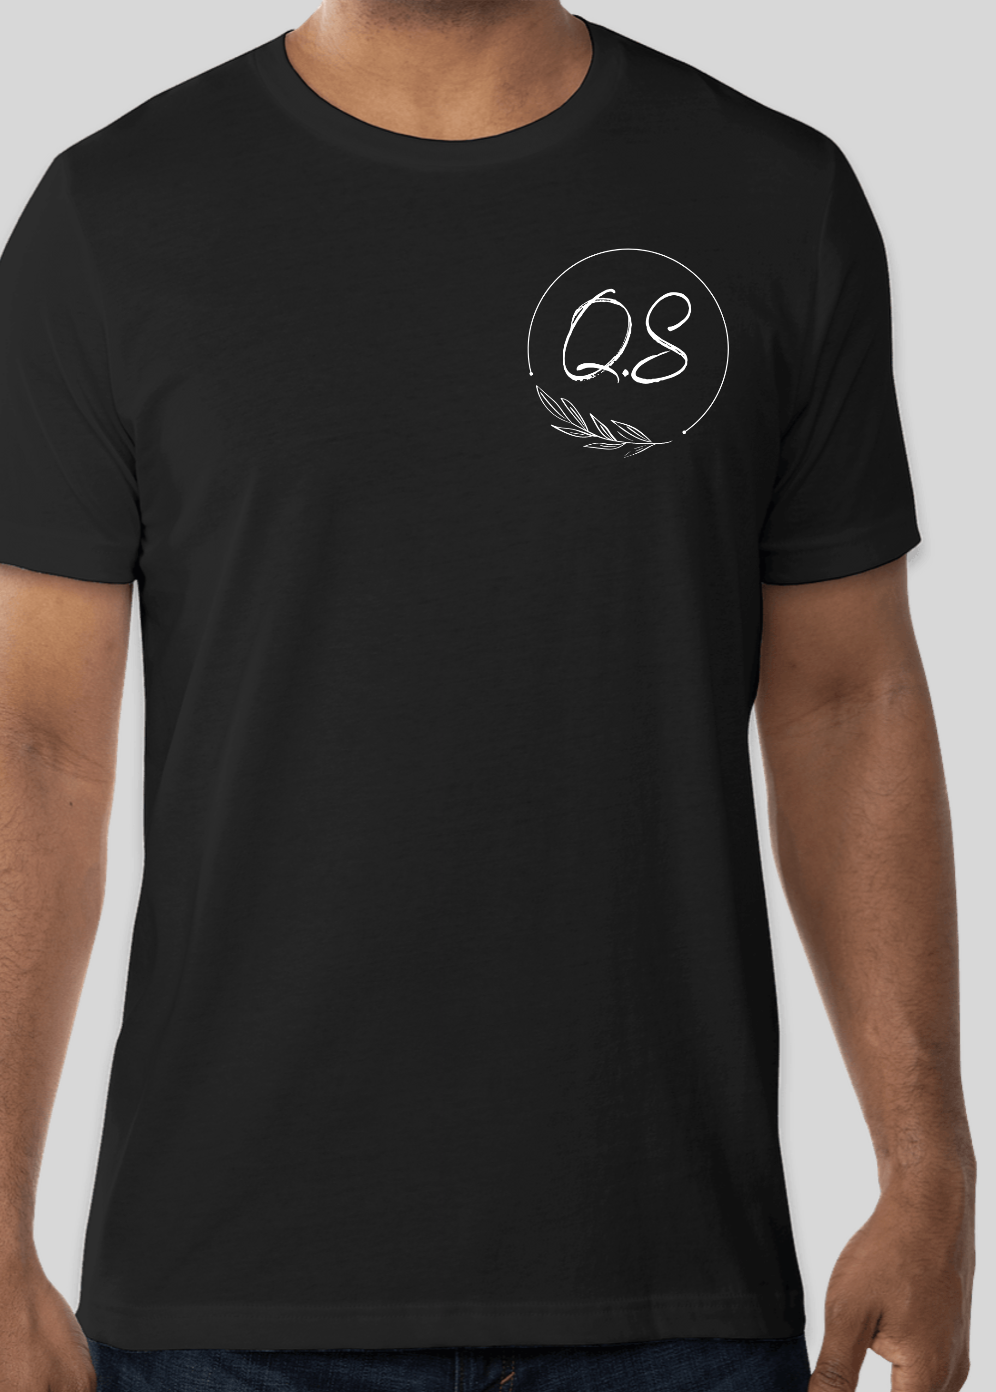 QS | T-shirt Shande By Sweets Quality